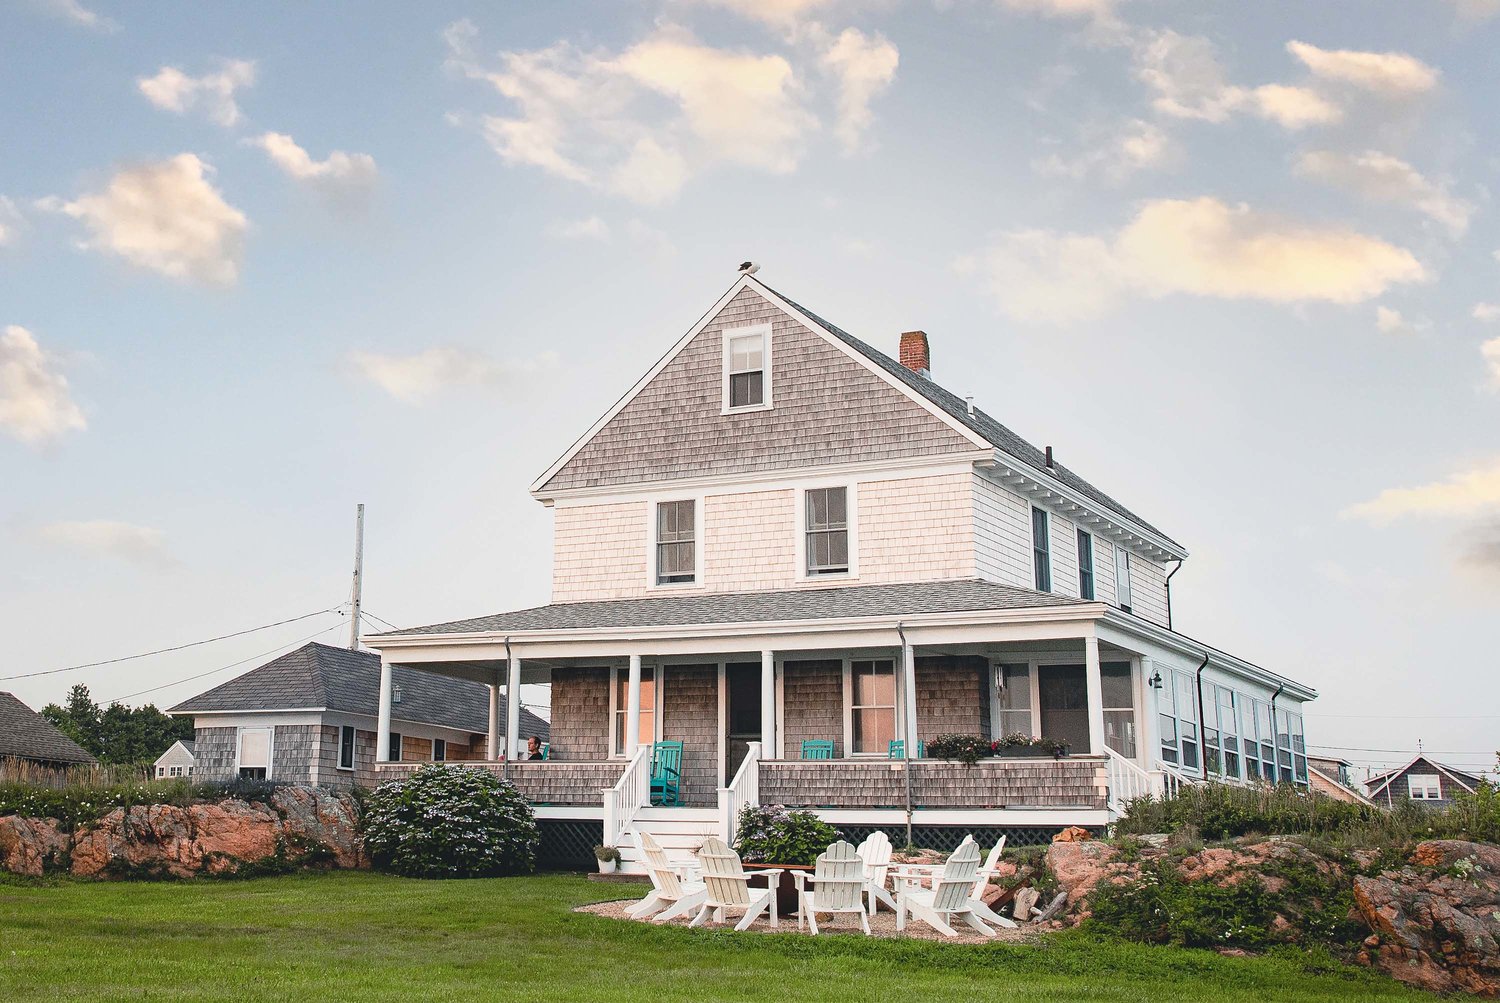 The newly renovated “Big House” sits on scenic Sakonnet Harbor and is outfitted for gatherings